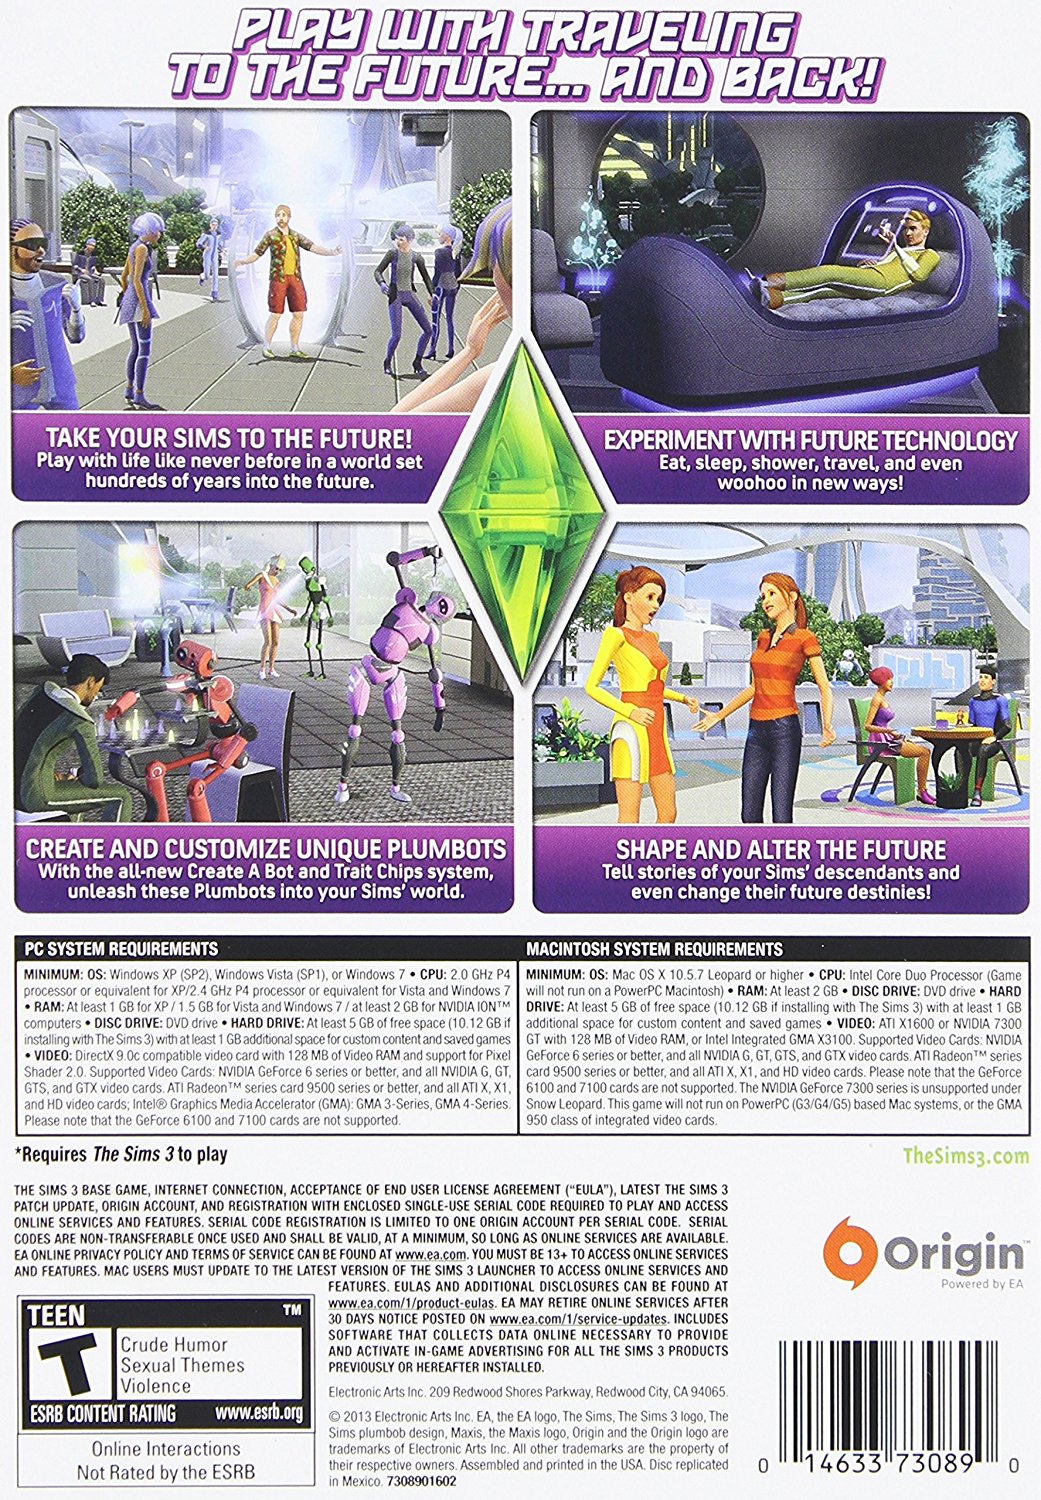 Ea The Sims 3 Into The Future - Simulation Game Retail - Dvd-rom - Mac, Pc (73089) - image 1 of 5